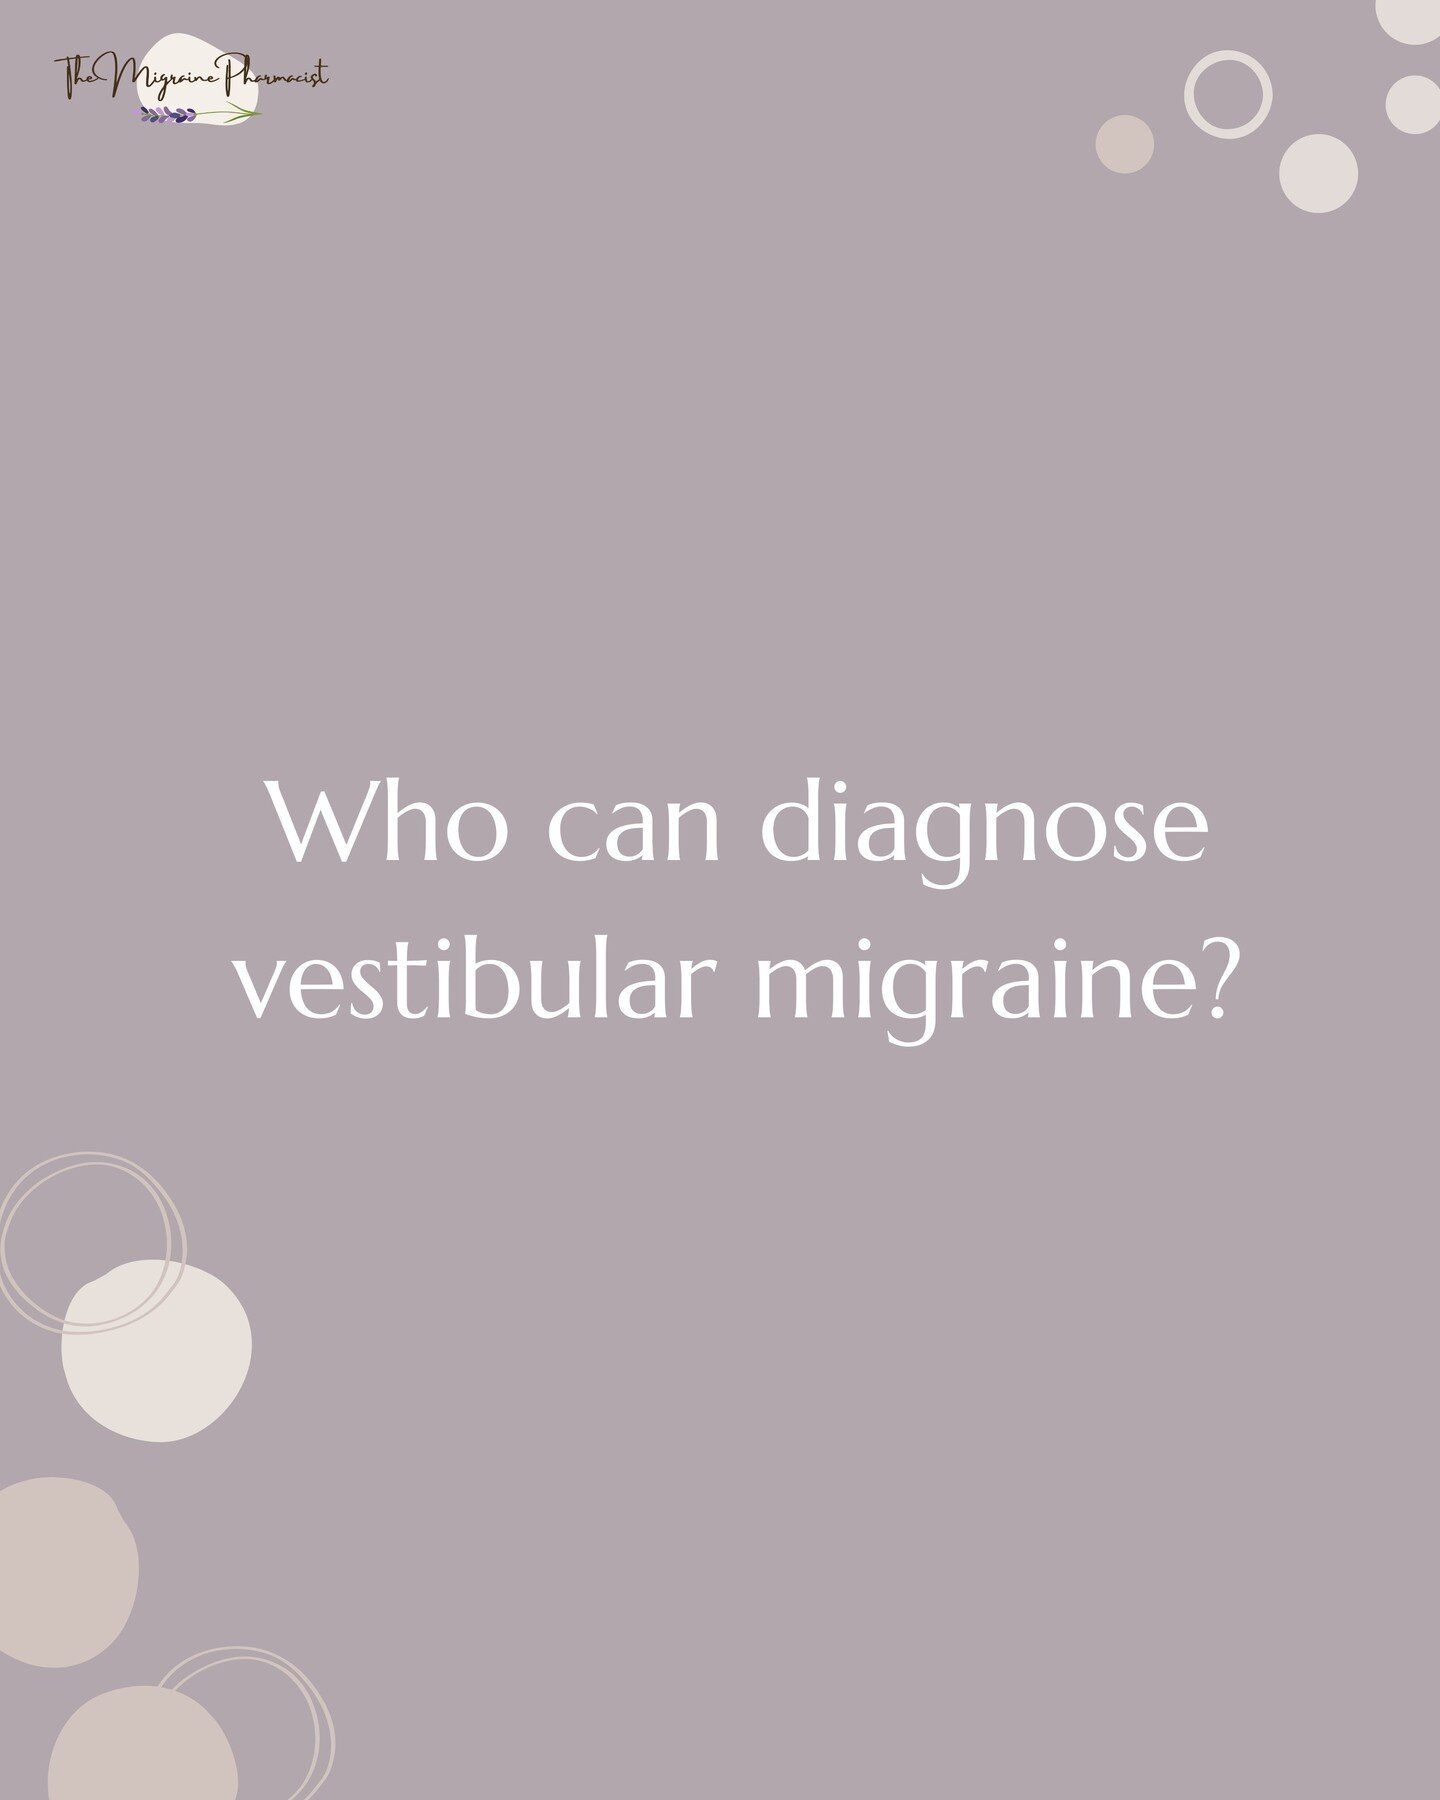 Traditionally, patients with recurrent vertigo associated with migraine are seen in consultation by neurologists. Otolaryngologists and internists are now becoming more familiar with this condition, but there remains a huge gap between those who care